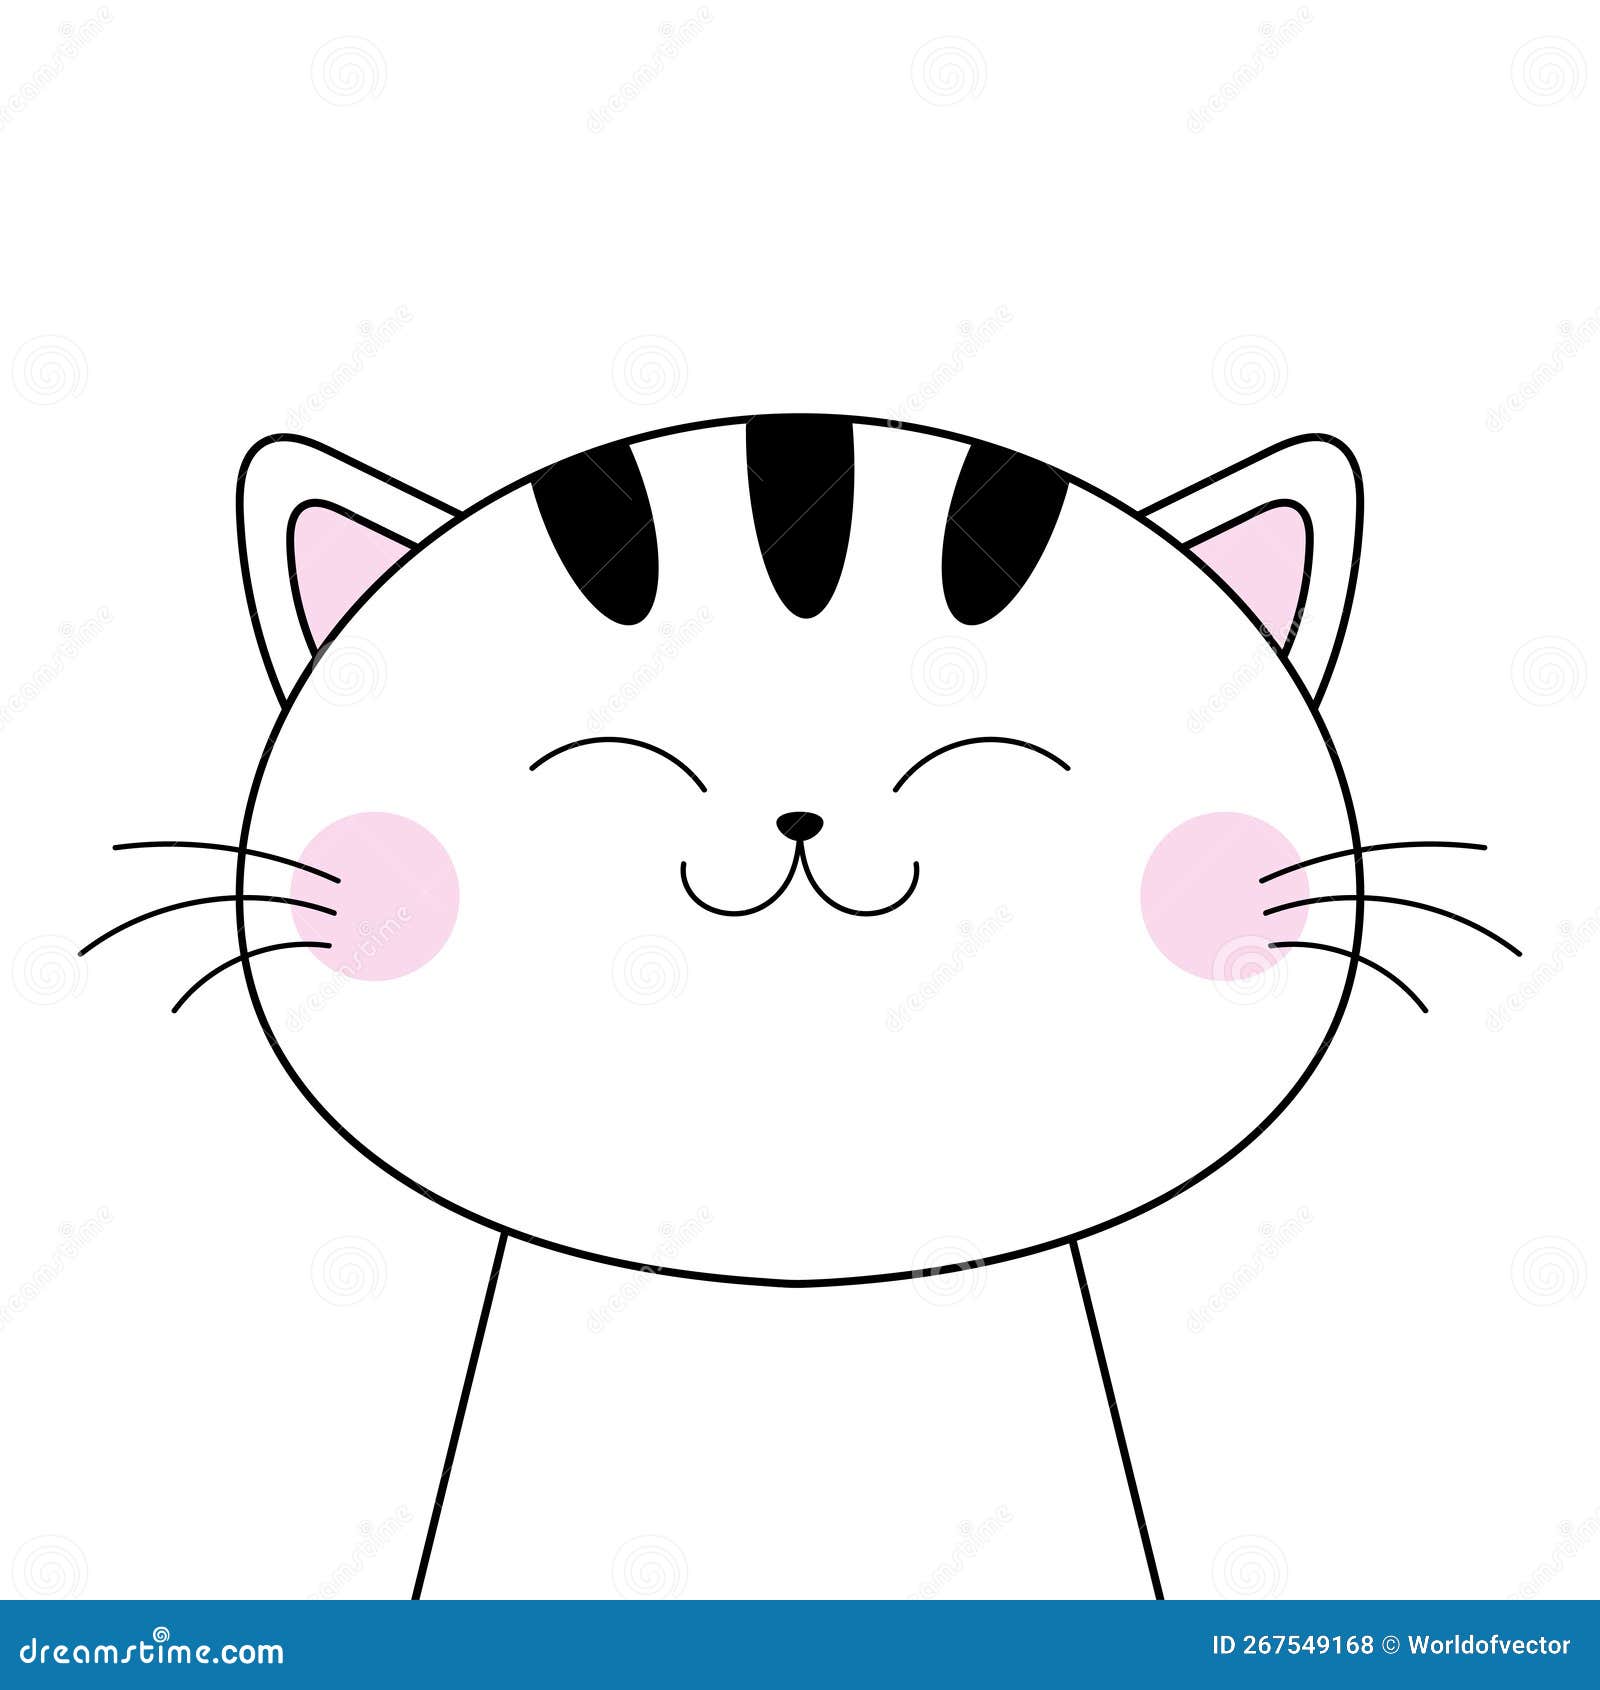 Cute cat face head icon cartoon funny character Vector Image